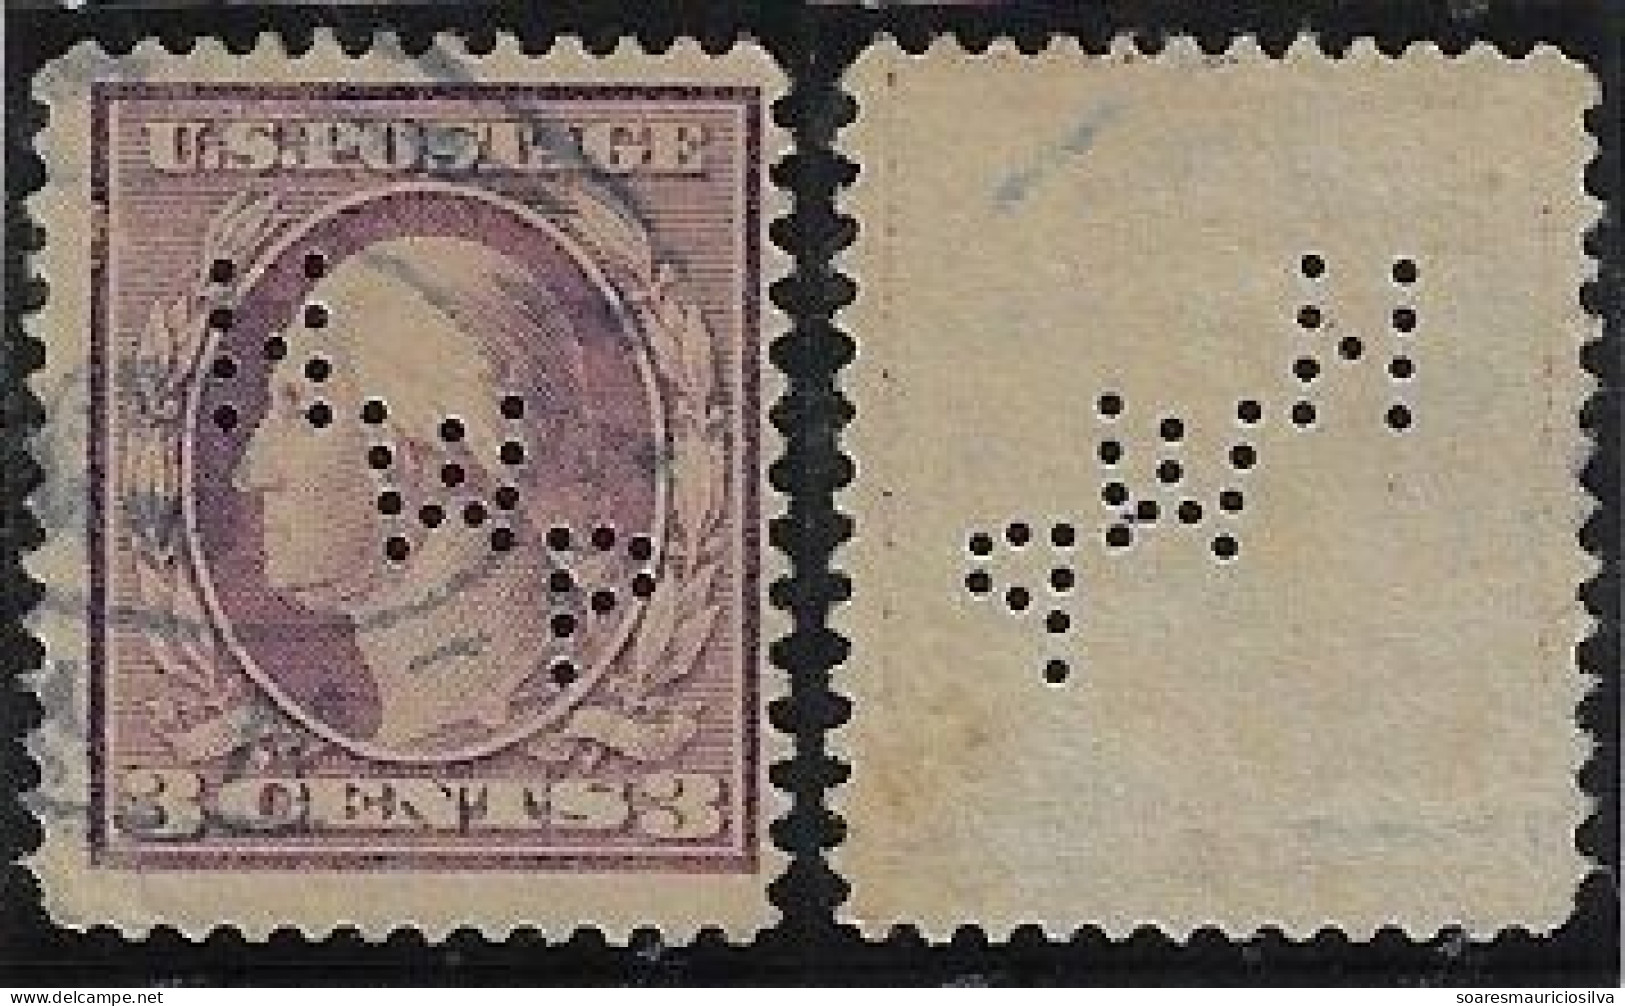 USA United States 1902/1926 Stamp With Perfin HWP By Henry W. Peabody Company From New York Lochung Perfore - Perforés